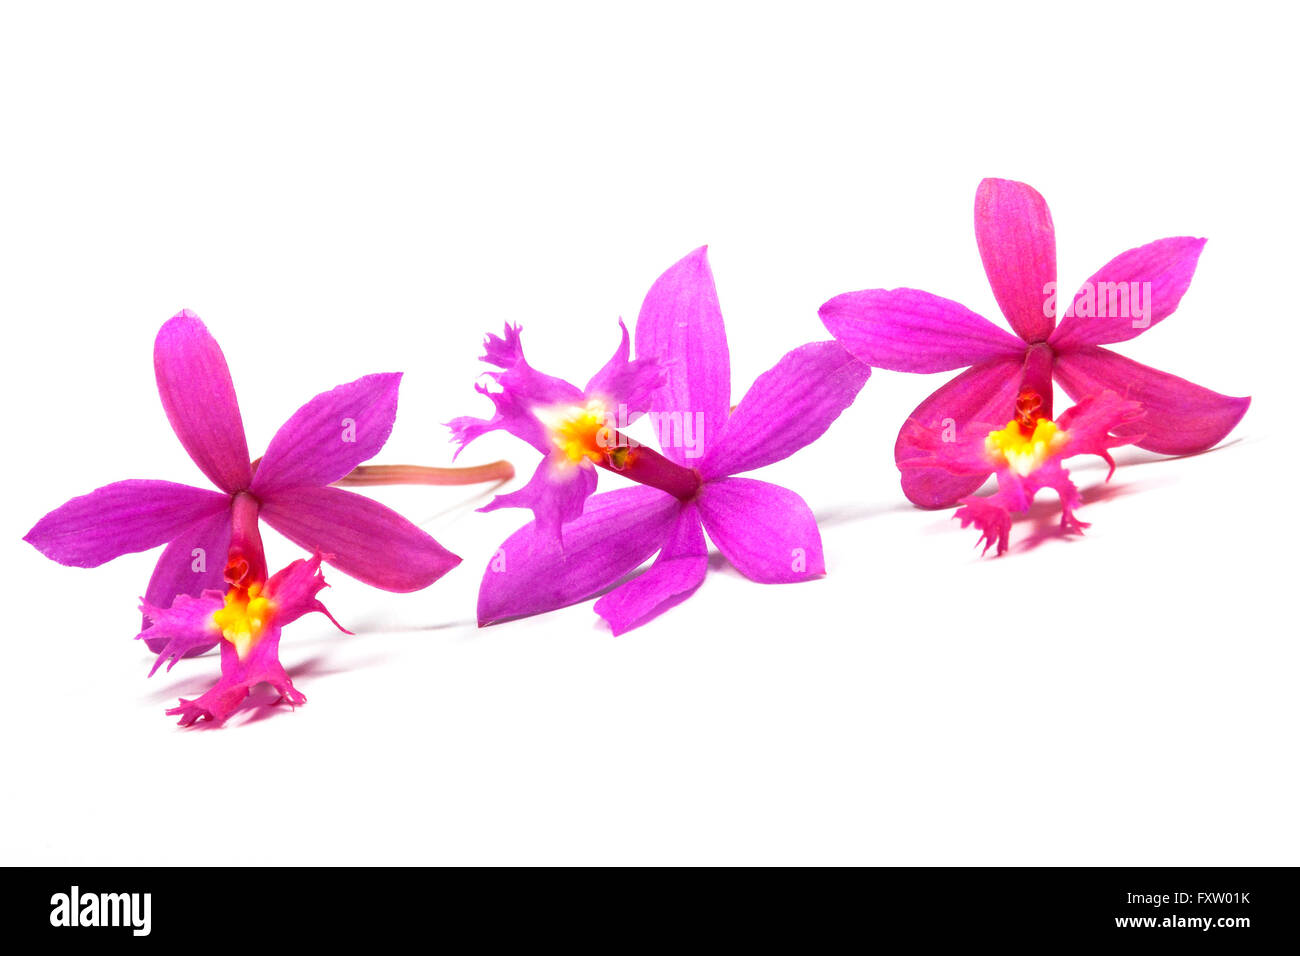 Row of three tiny pink epidendrum orchids with yellow centers on white Stock Photo